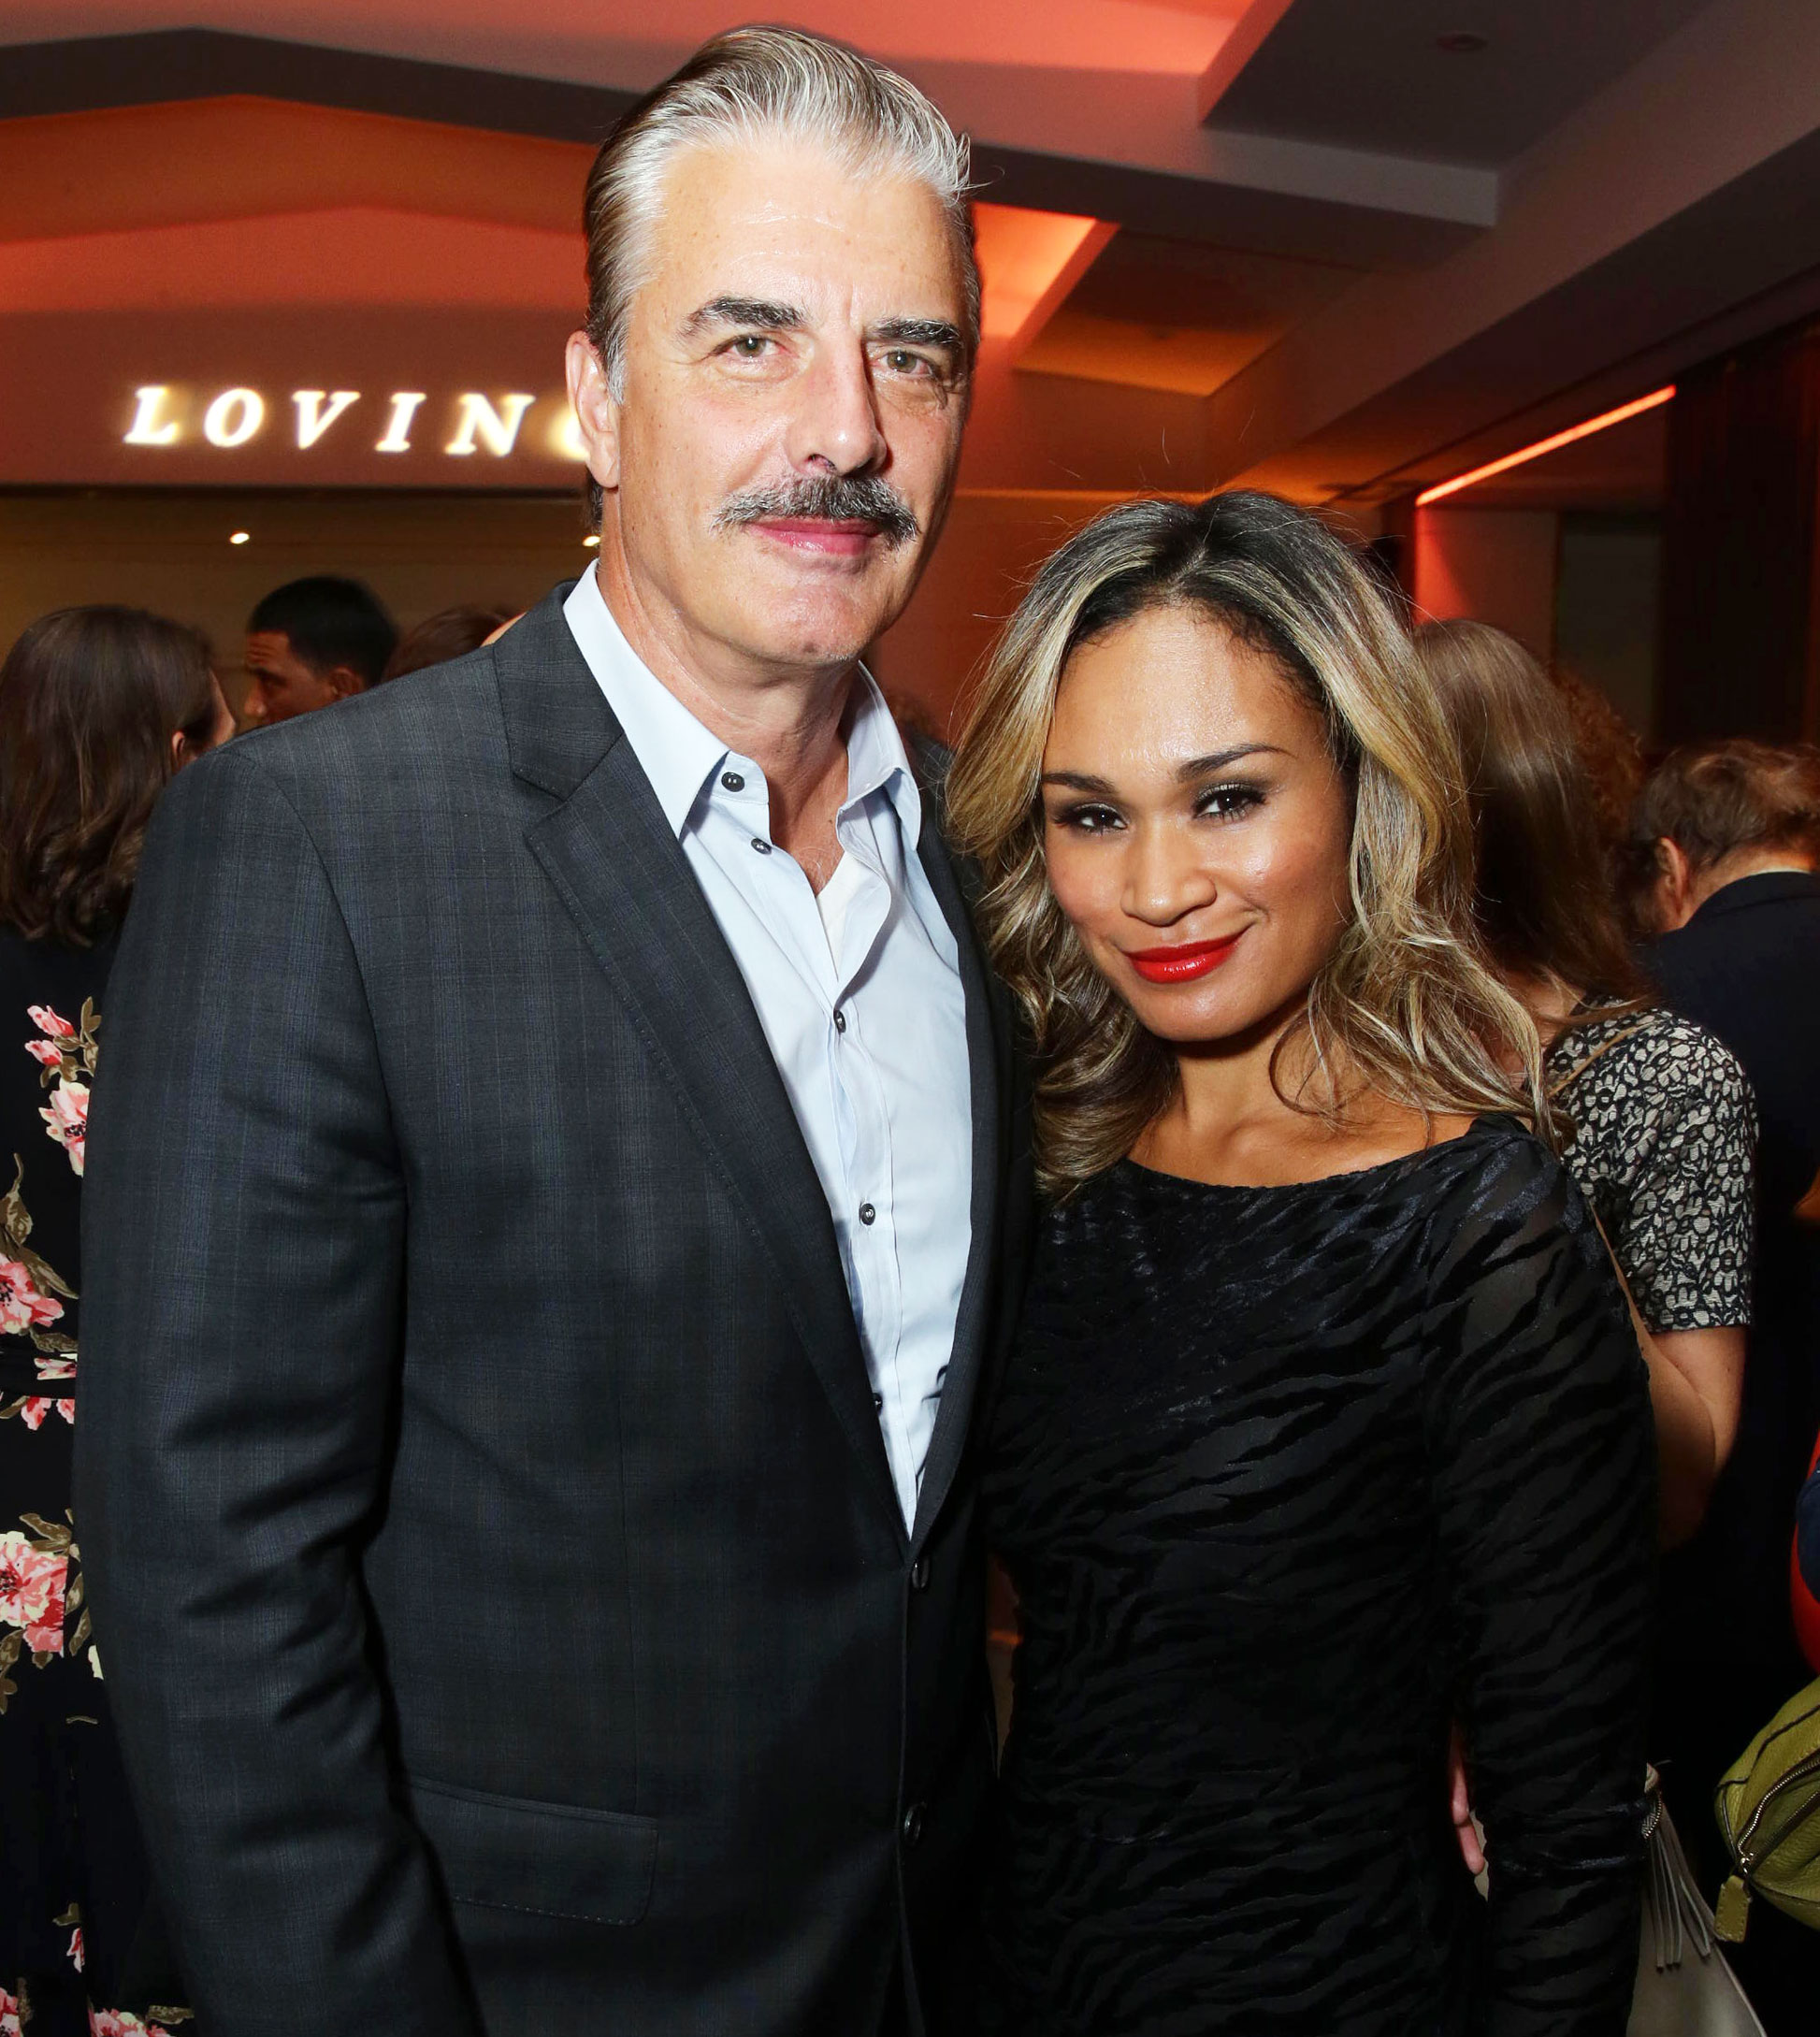 Chris Noth’s Wife Tara Wilson Is Pregnant With Baby No. 2 UsWeekly